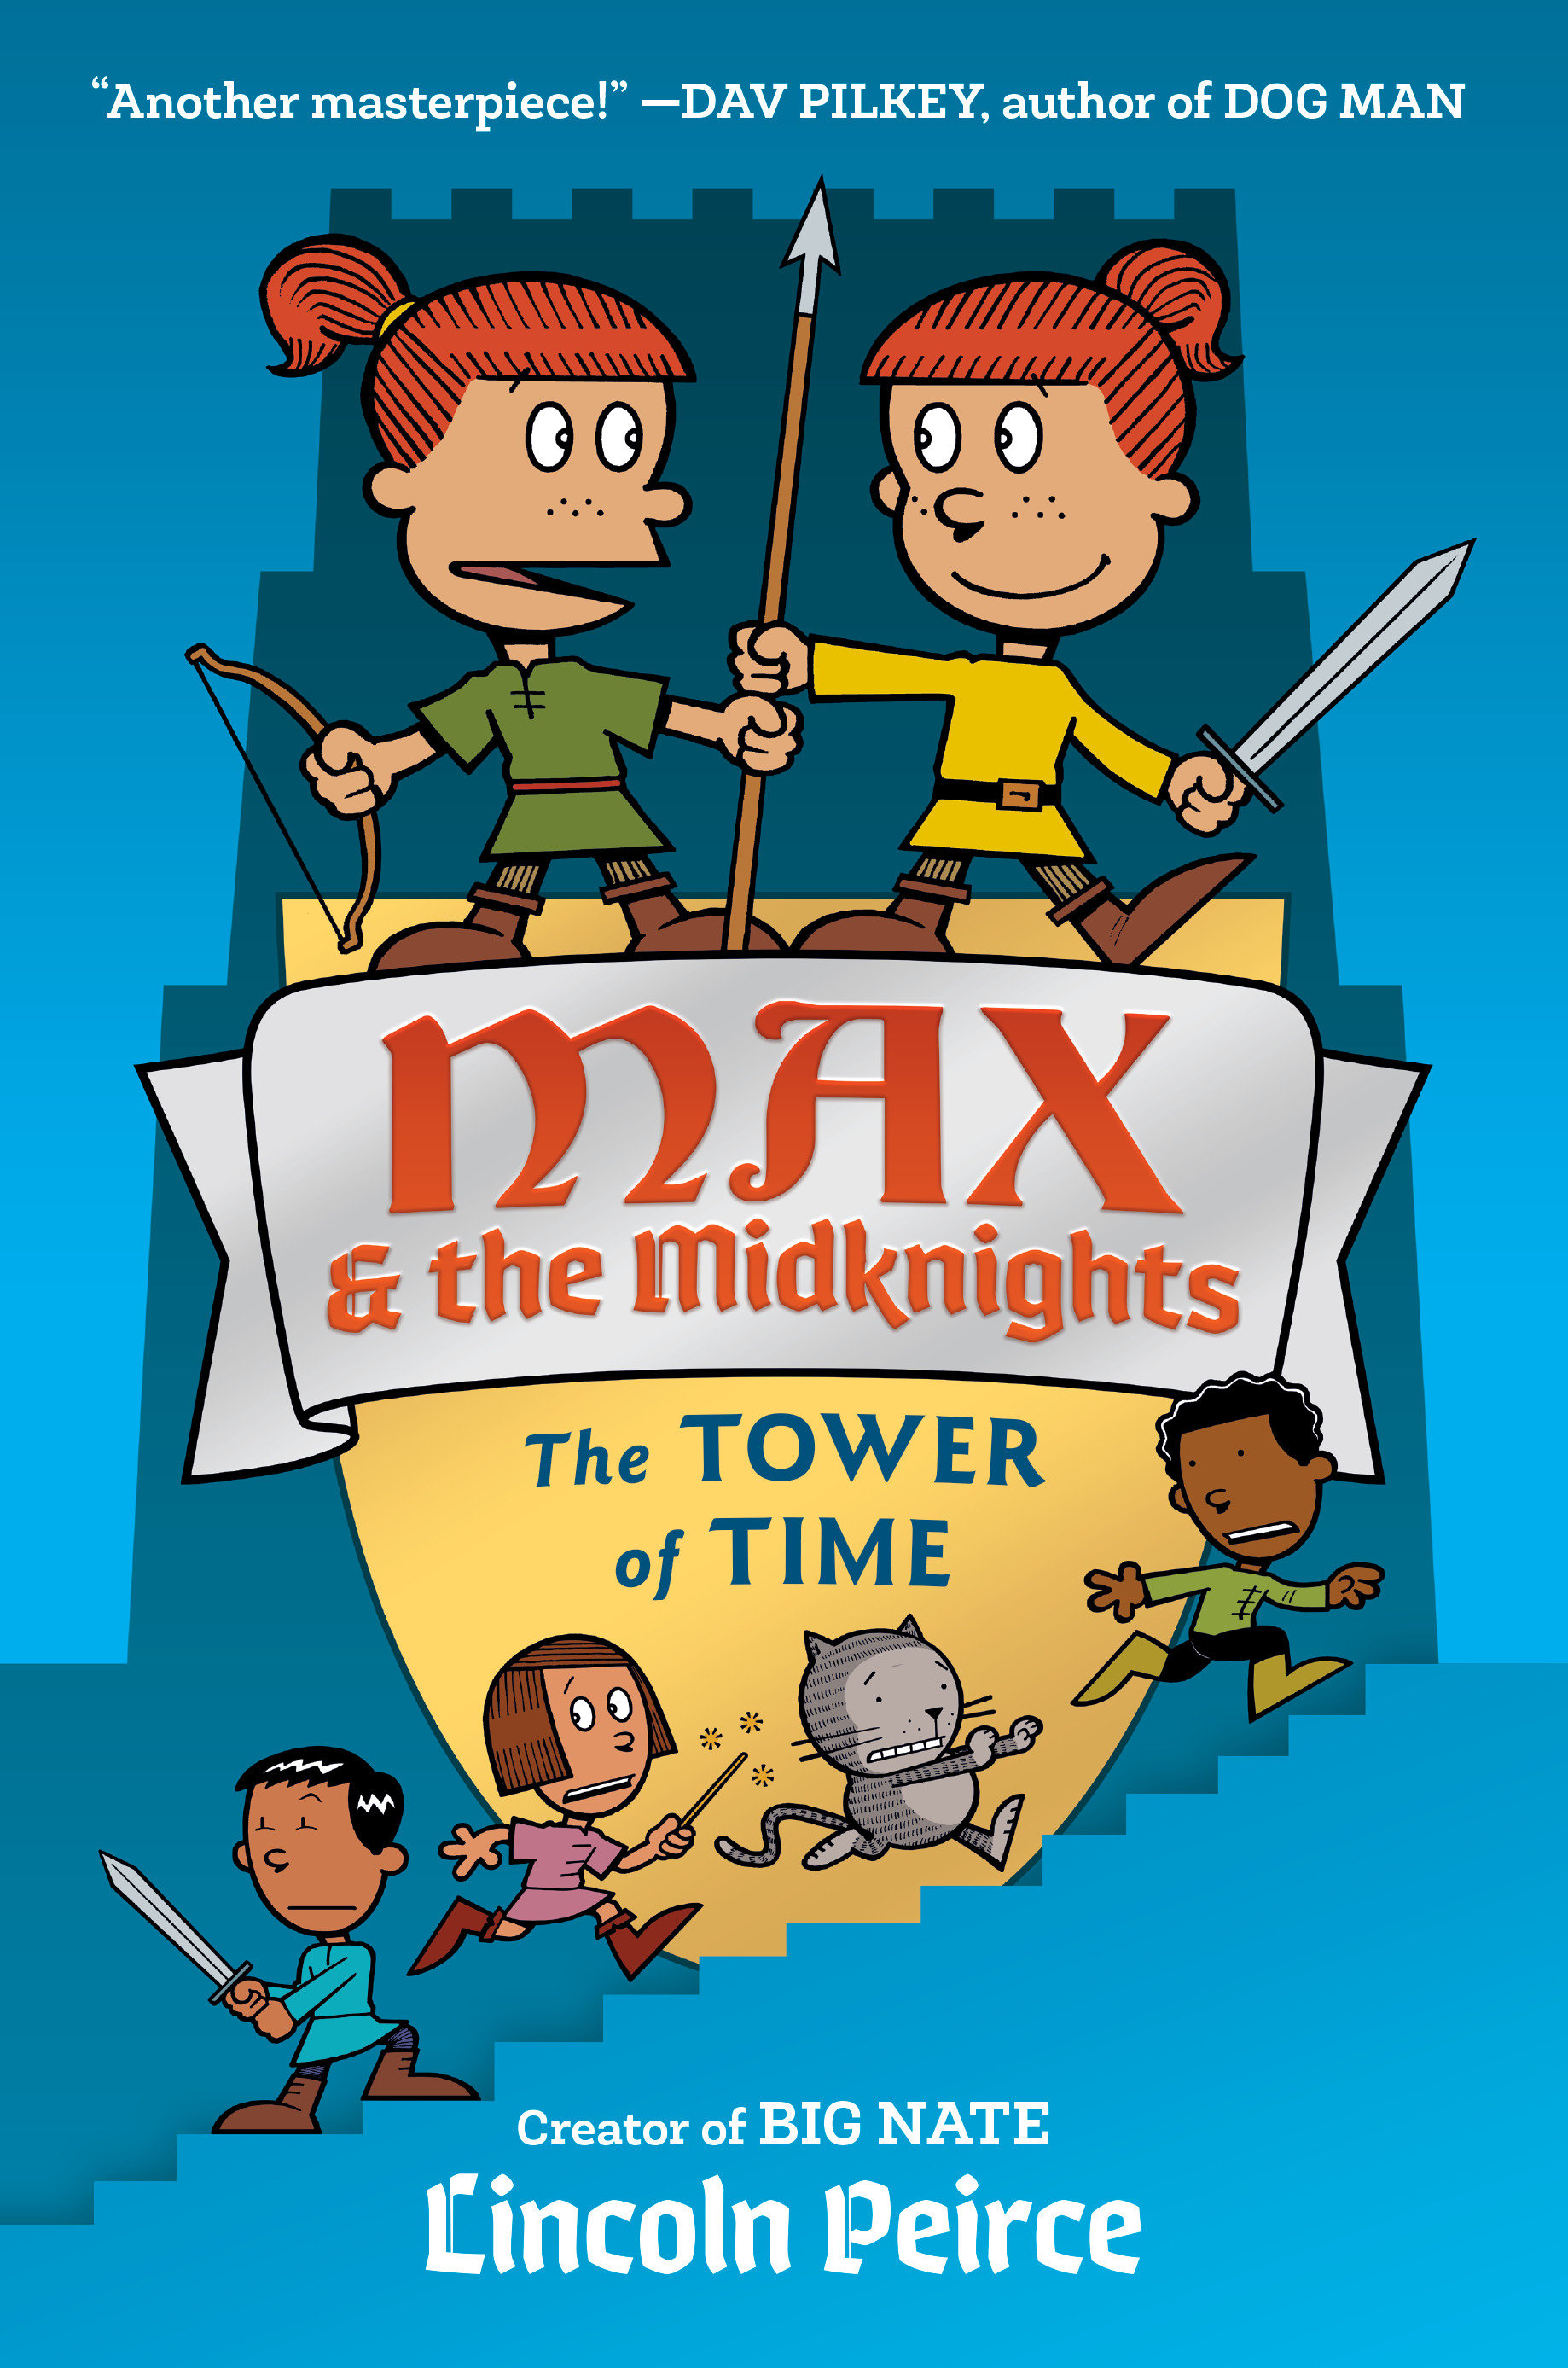 Max and the Midknights Illustrated Young Adult Novel Hardcover Volume 3 The Tower of Time